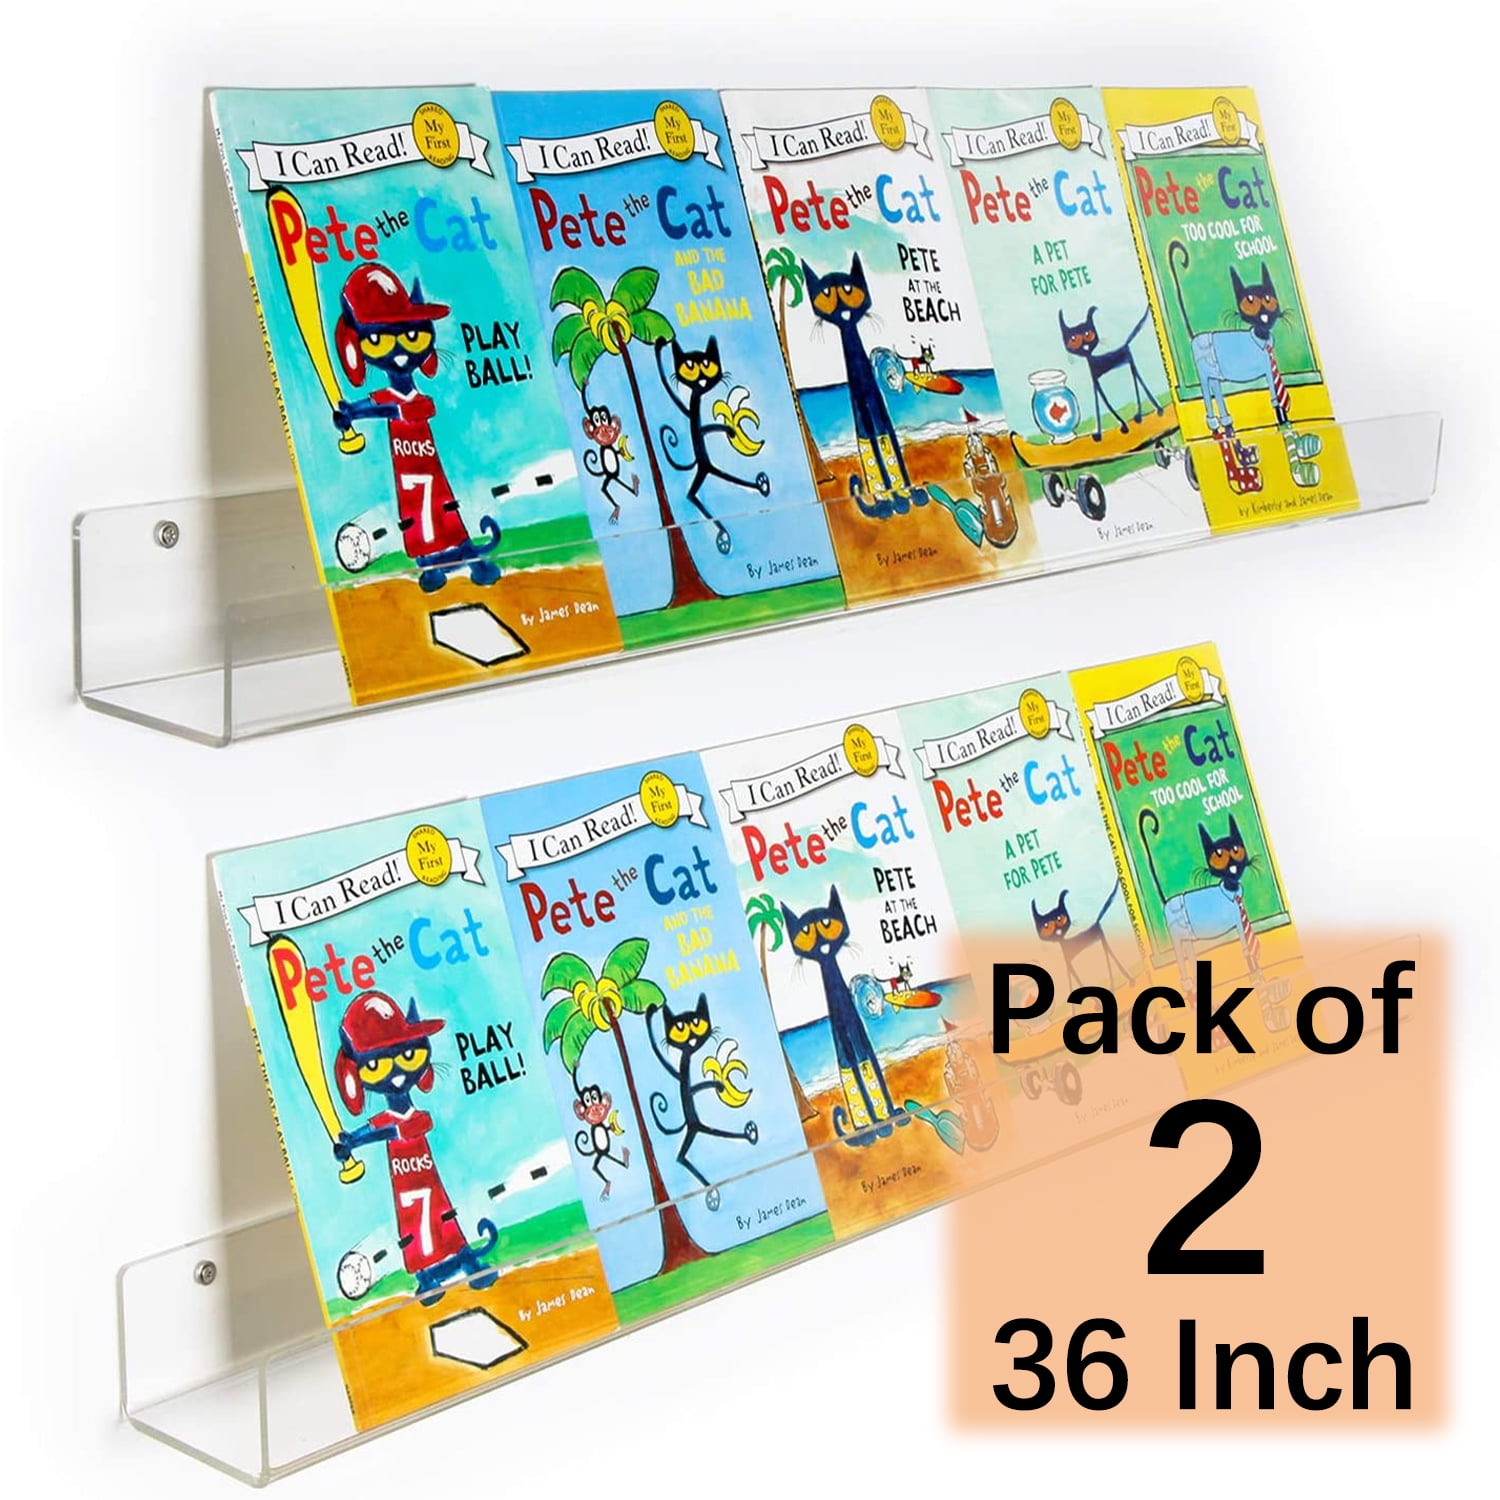  NIUBEE Acrylic 2 Packs Invisible Floating Bookshelves 24  inches,Kids Clear Wall Bookshelves Display Book Shelf,50% Thicker with Free  Screwdriver : Home & Kitchen